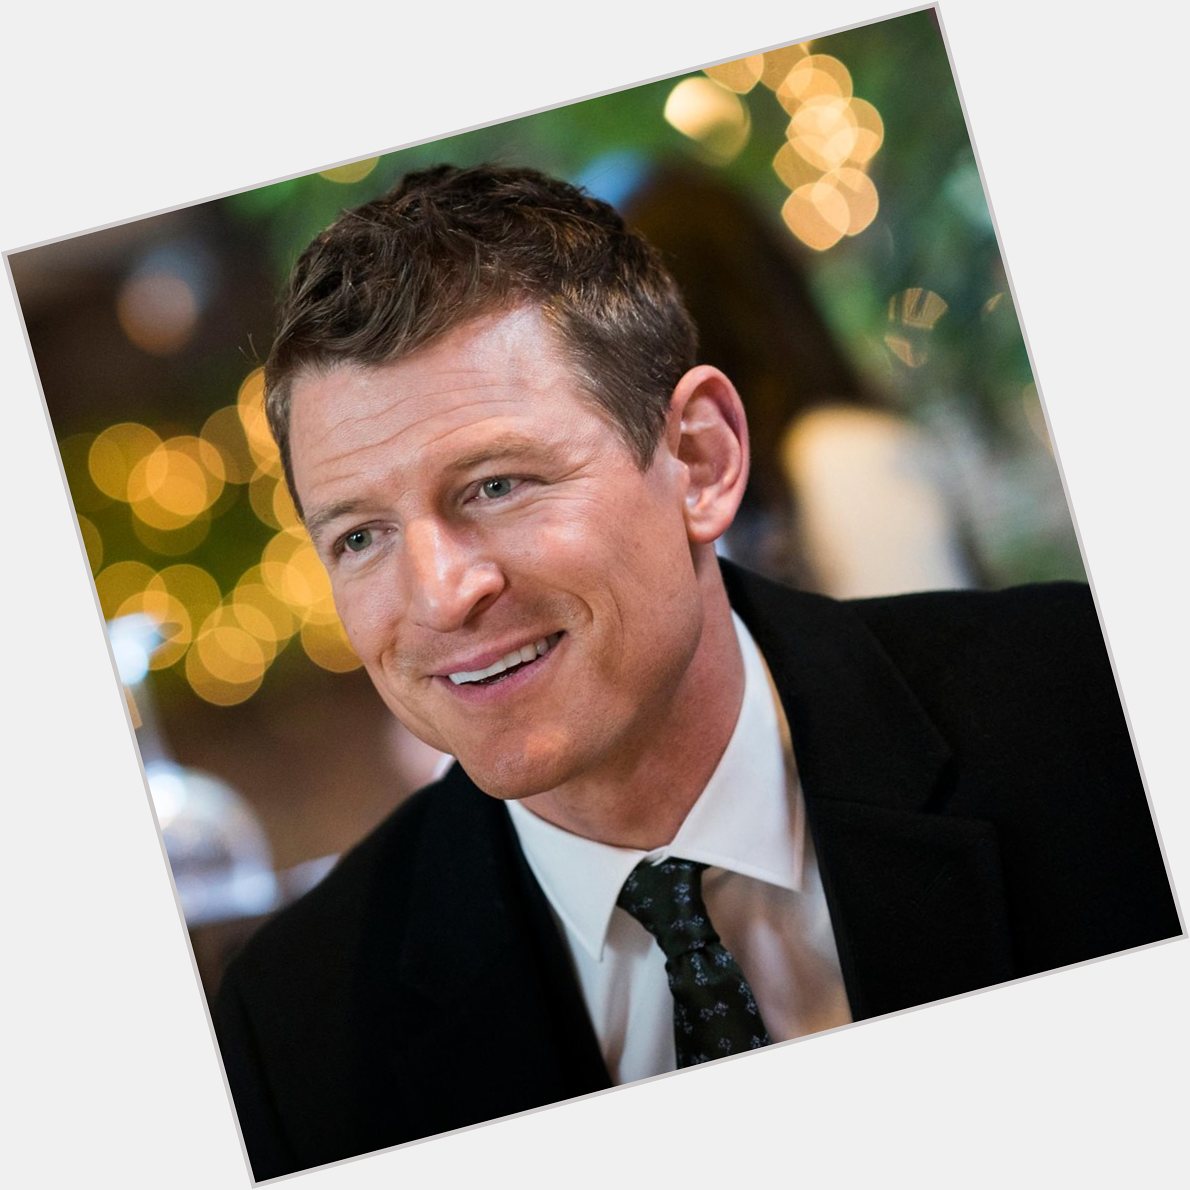 From Chicago to New York. Happy birthday to Philip Winchester. 